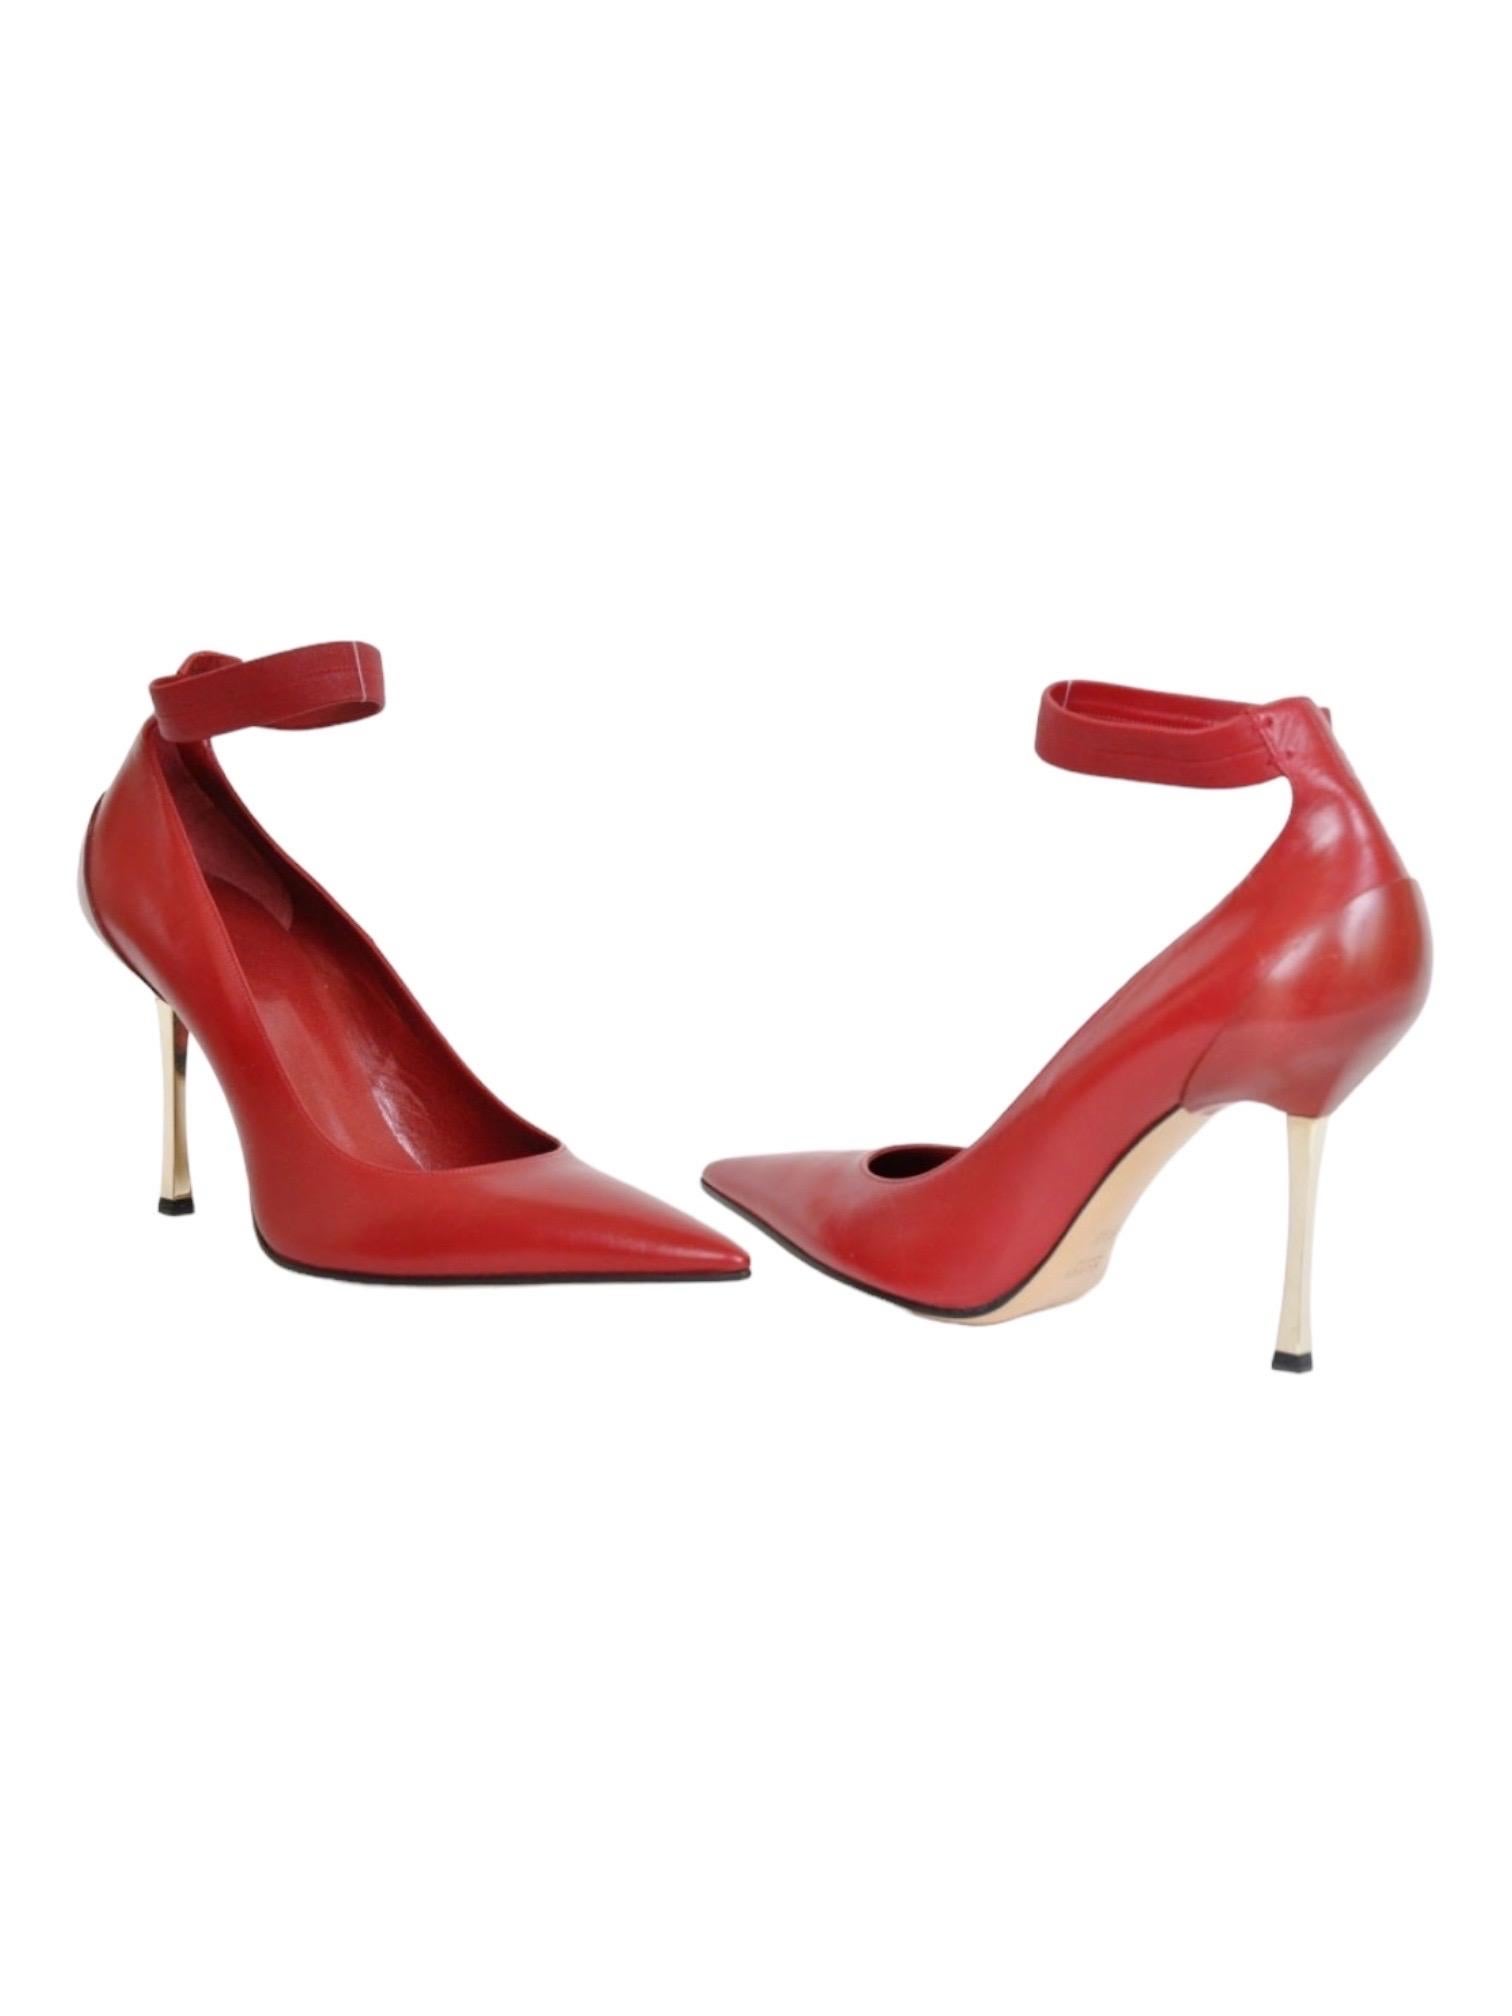 F/W 1997 Tom Ford for Gucci Red Leather Ankle-Strap Stiletto Shoes 40 - 10 *NEW! For Sale 1